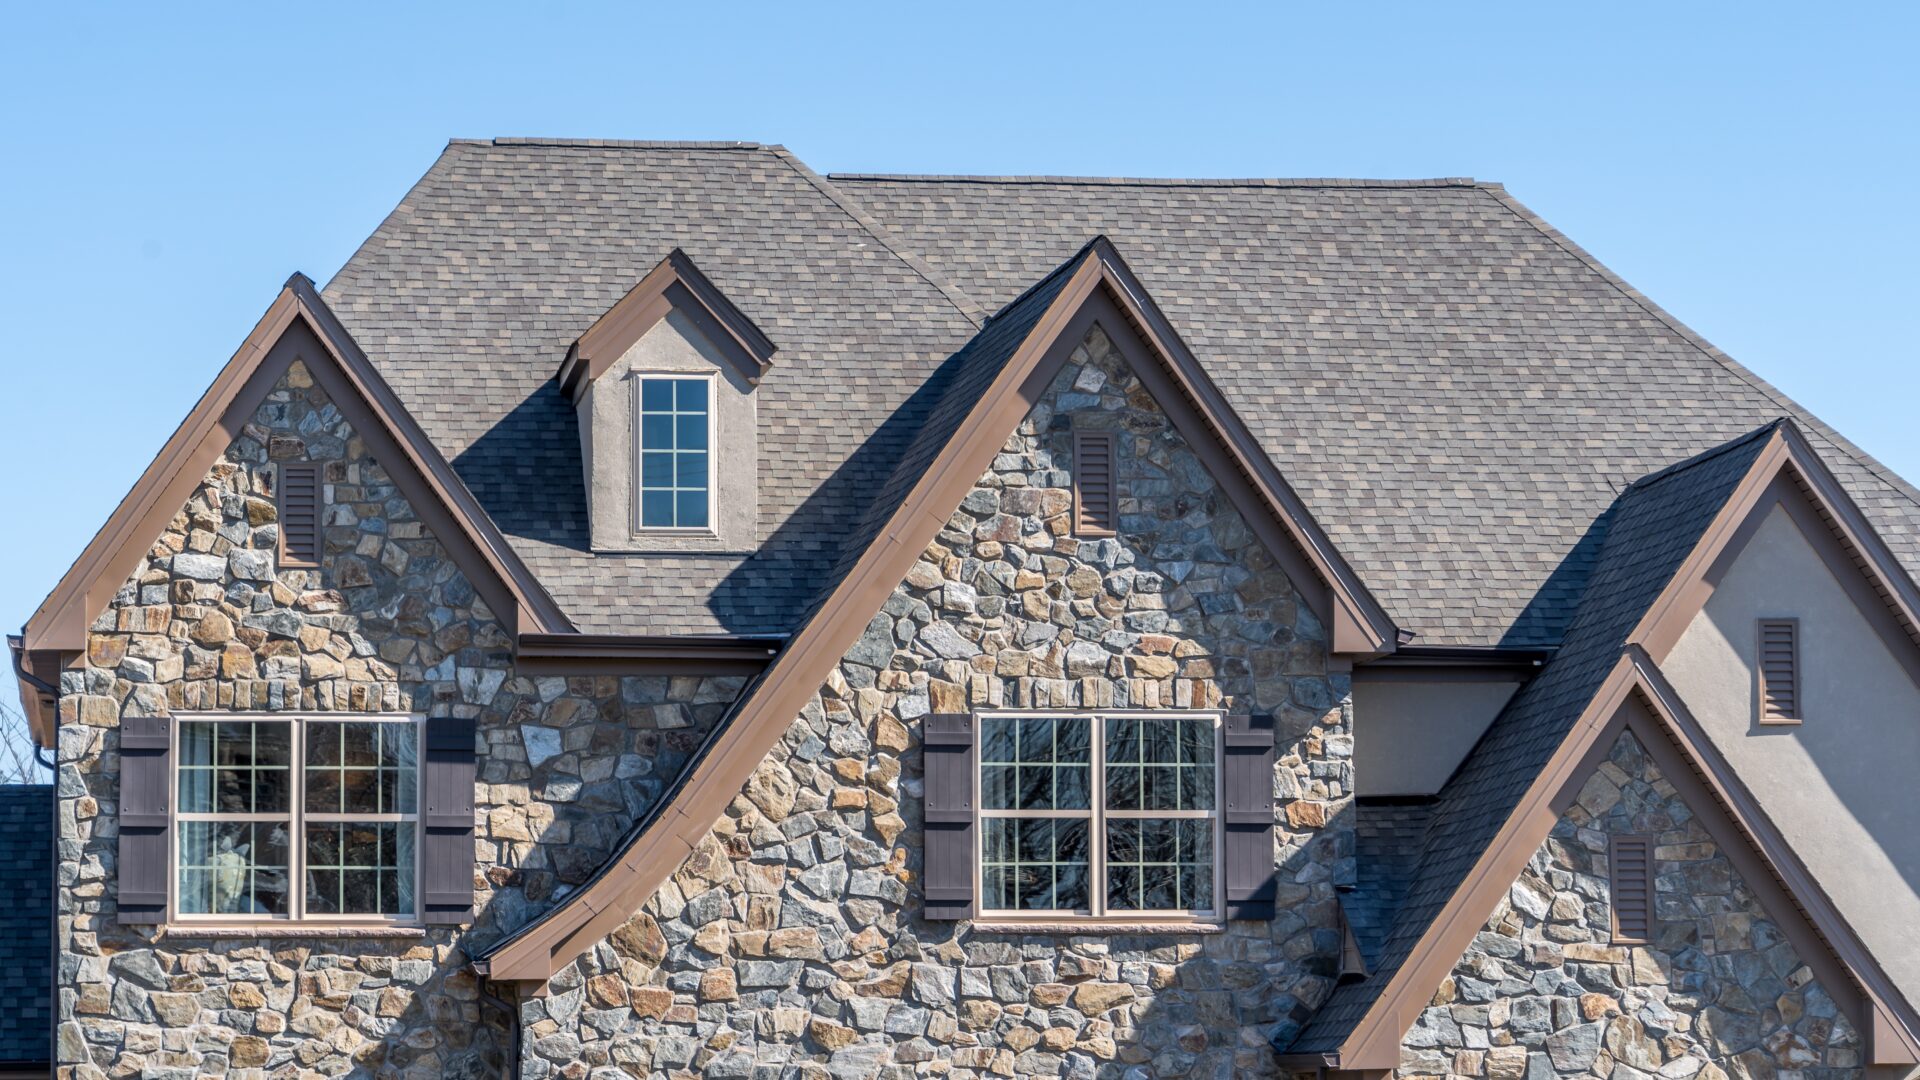 reliable roofing services friendswood brinkmann quality roofing services scaled Friendswood